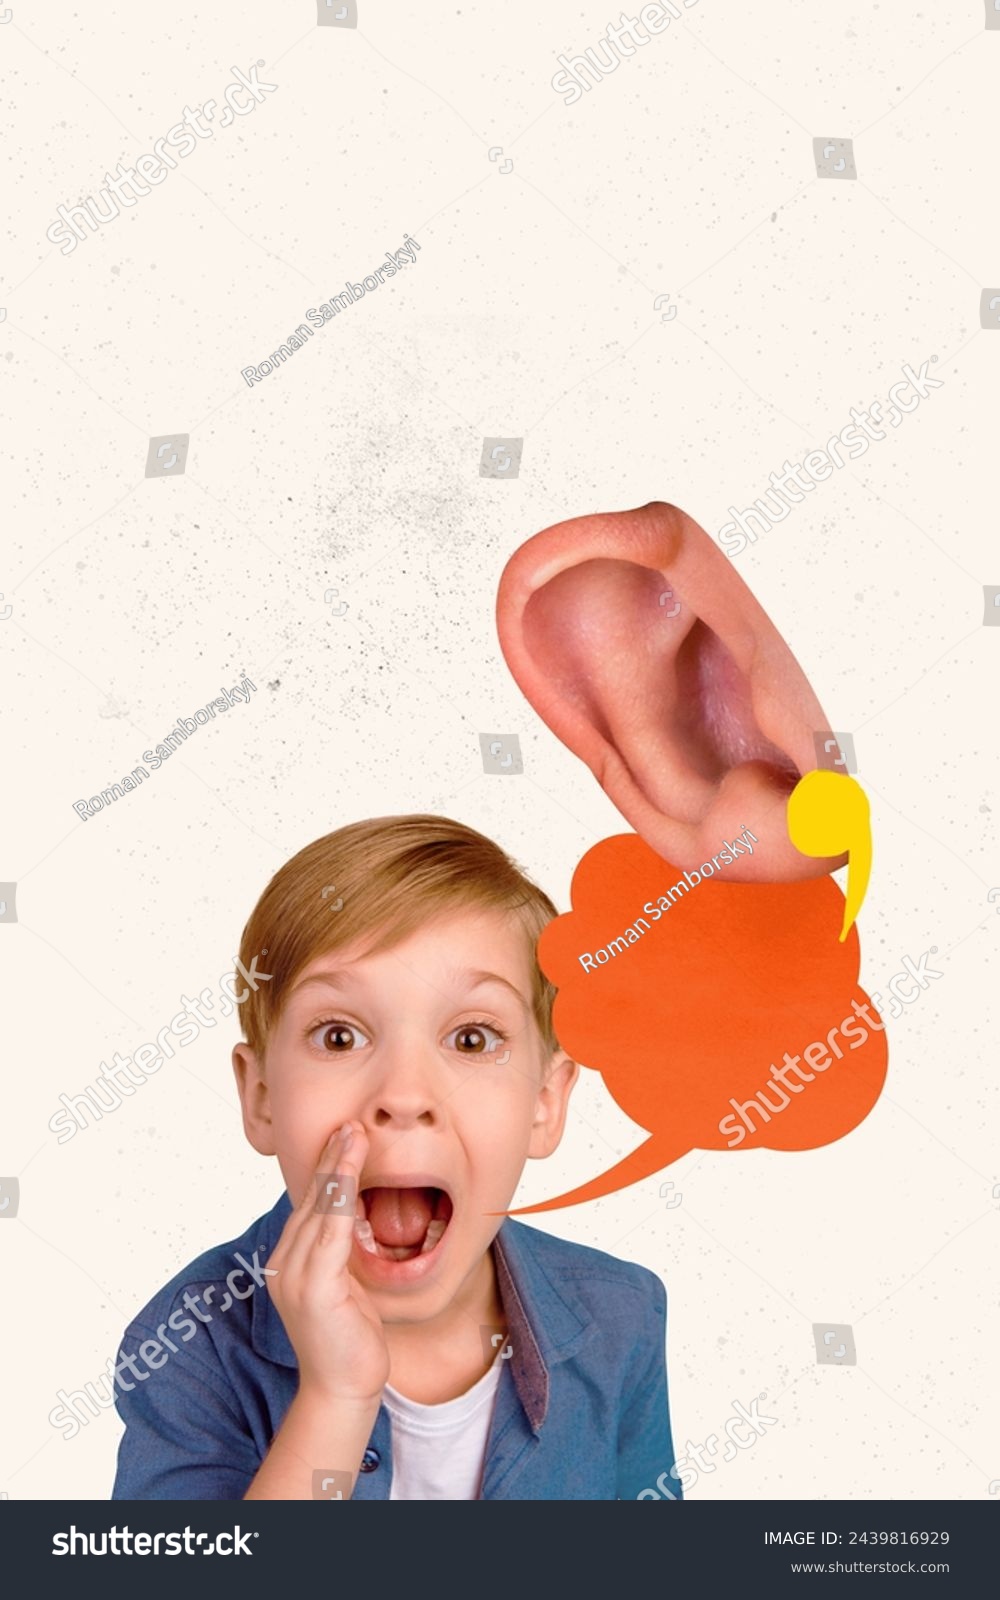 3D photo collage trend artwork composite sketch image of small boy school age share news gossip rumors to friend huge ear listen #2439816929